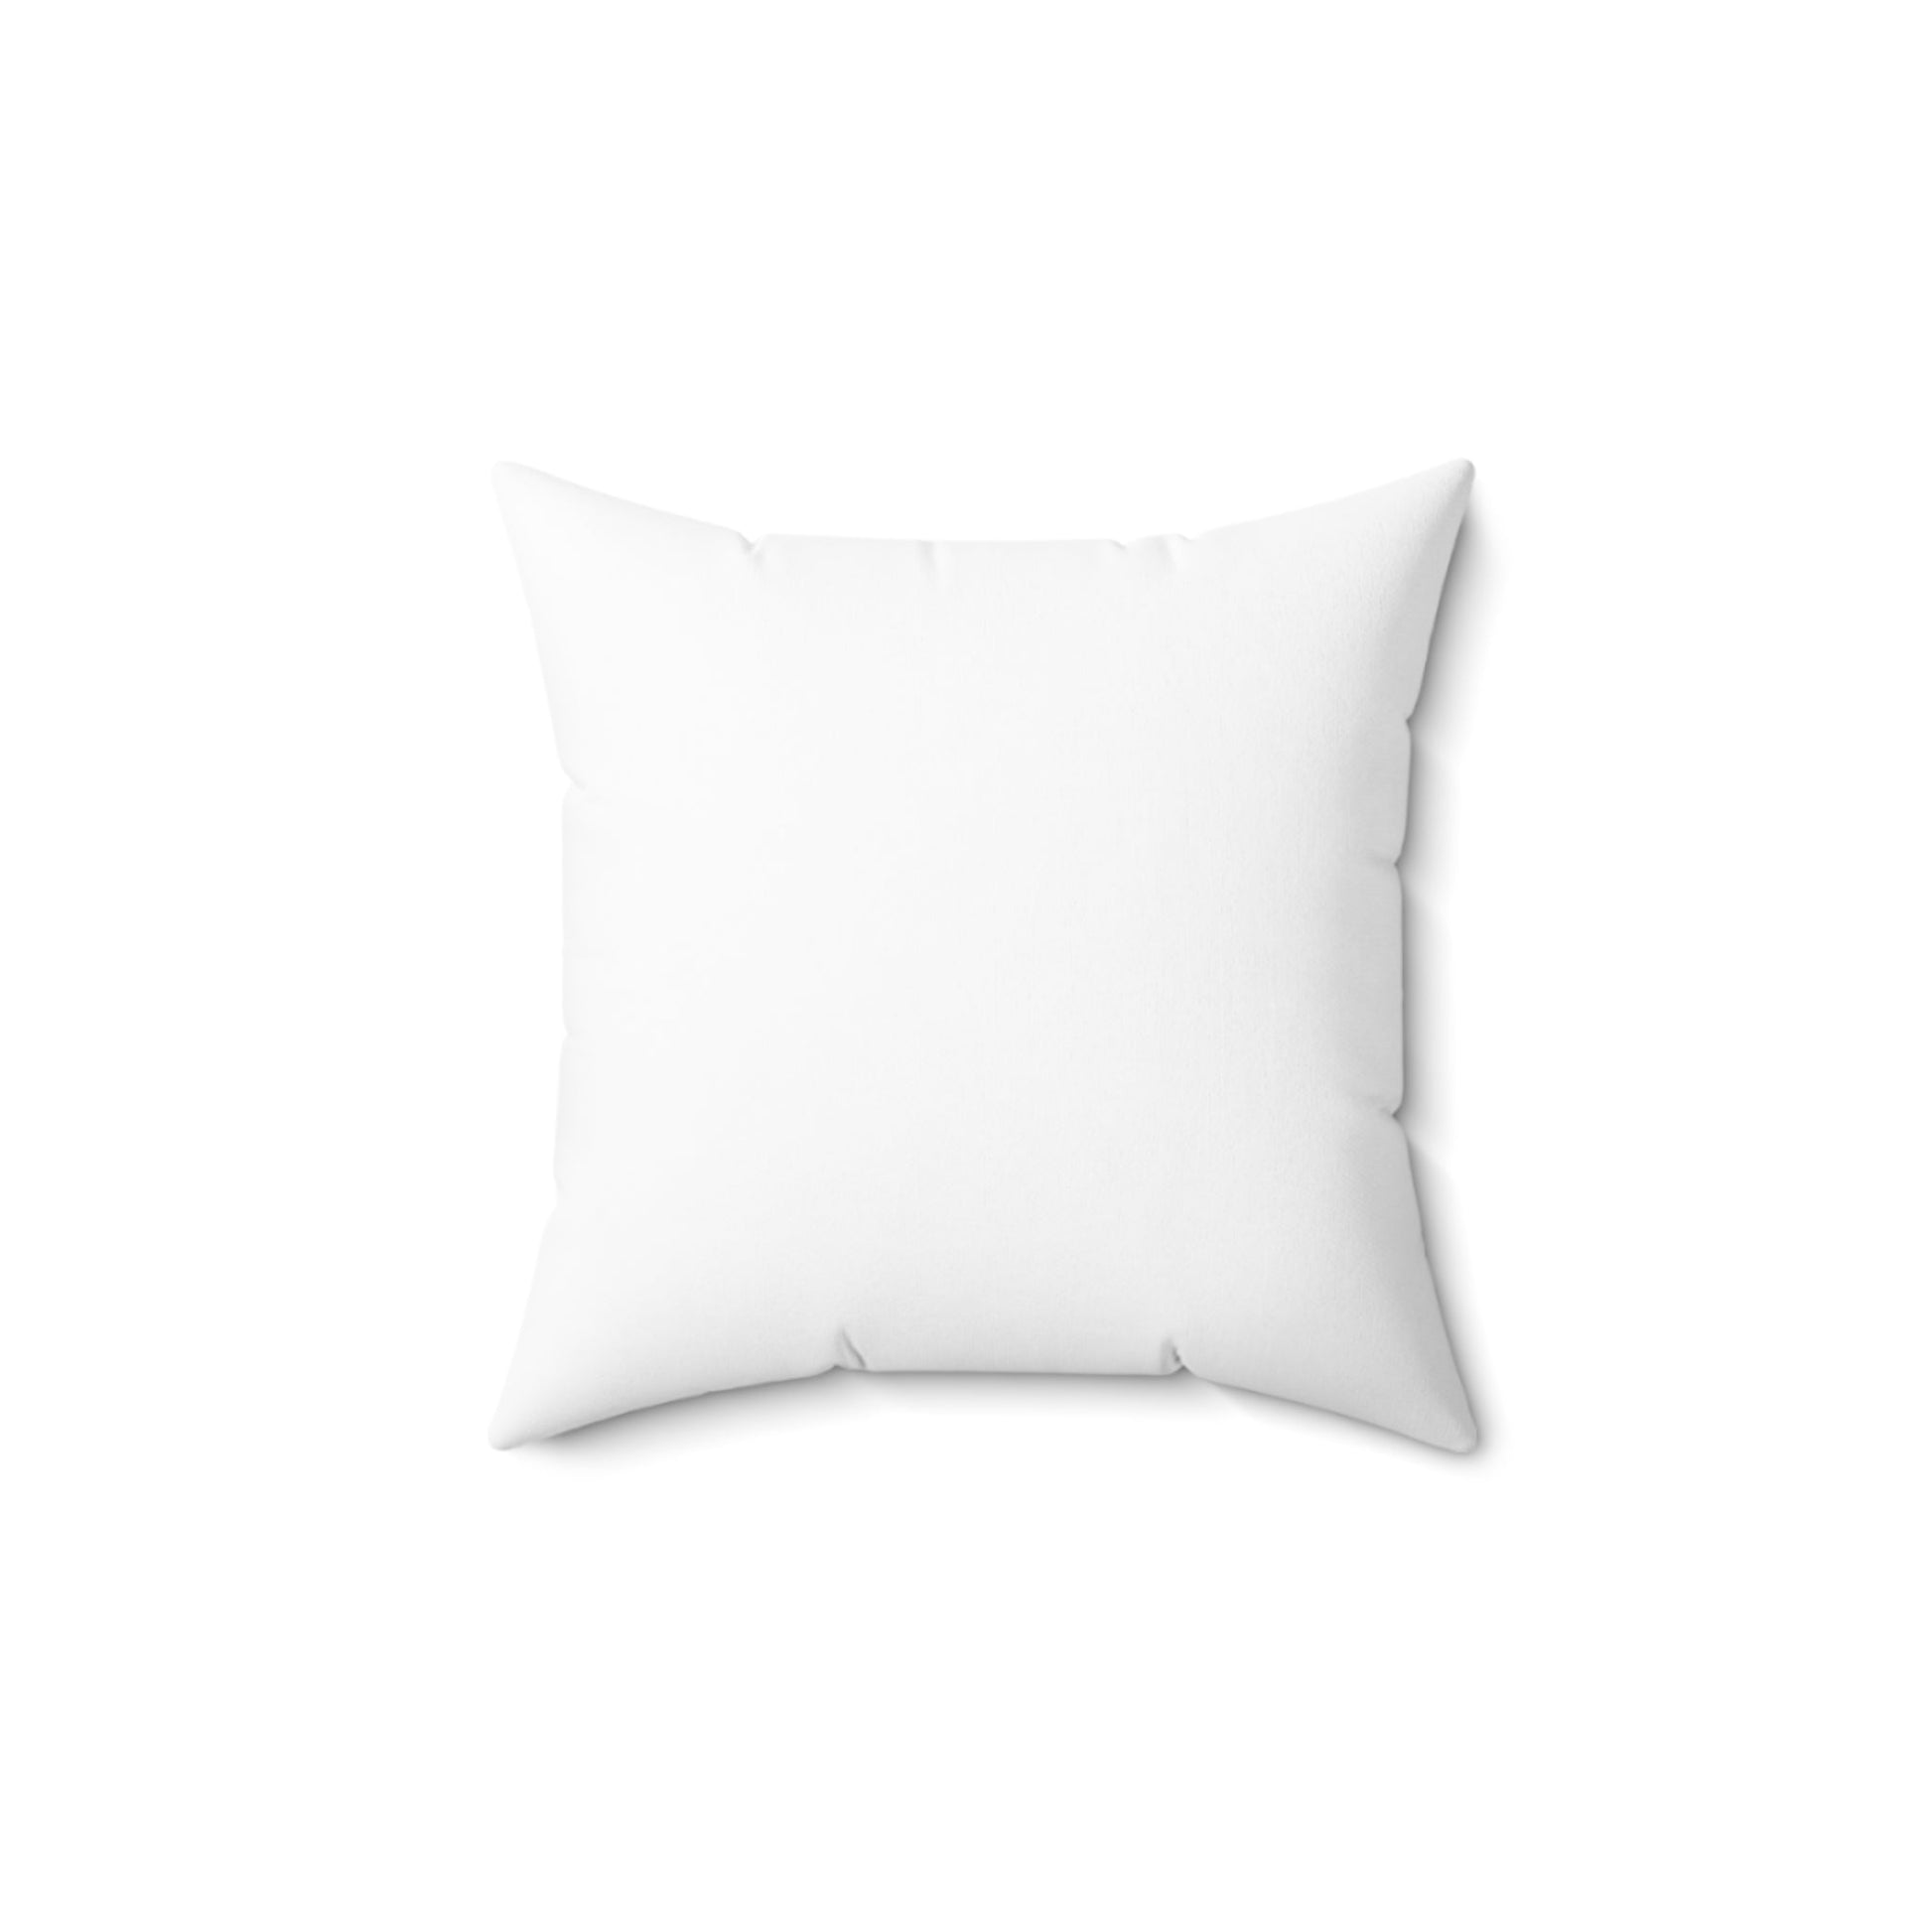 Get trendy with College decor pillow - Home Decor available at Good Gift Company. Grab yours for $21.87 today!